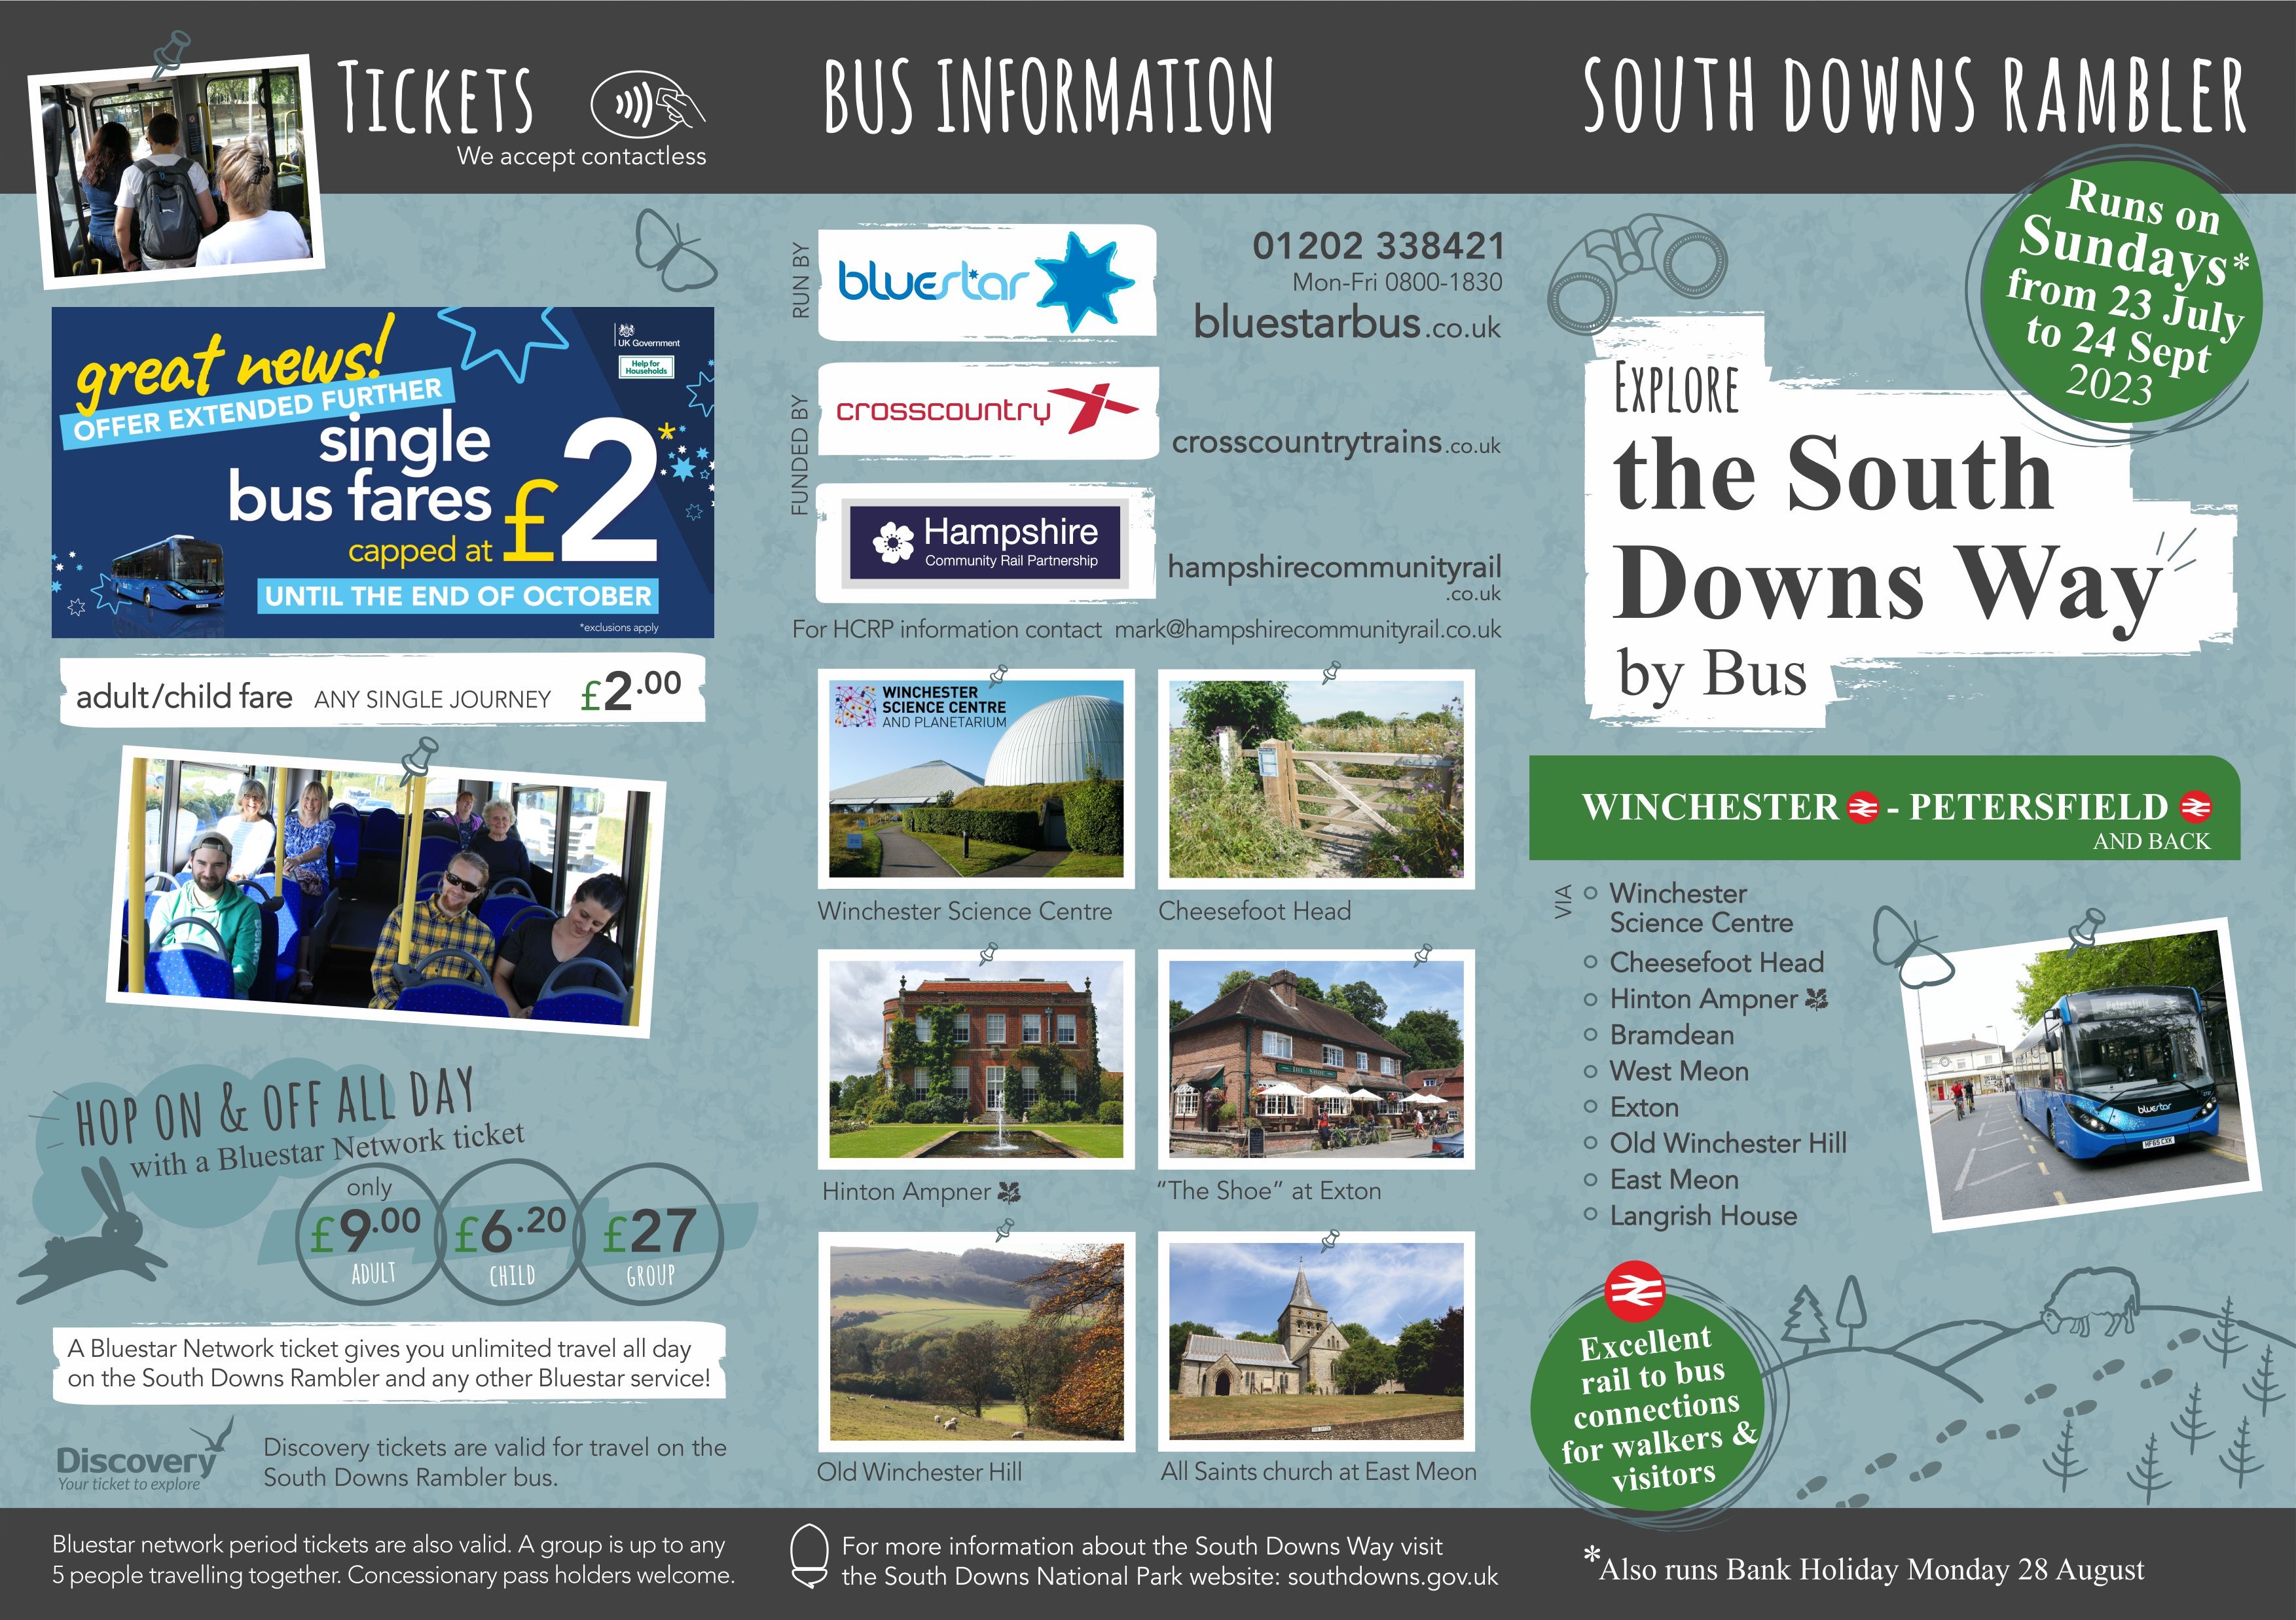 Poster for the South Downs Rambler